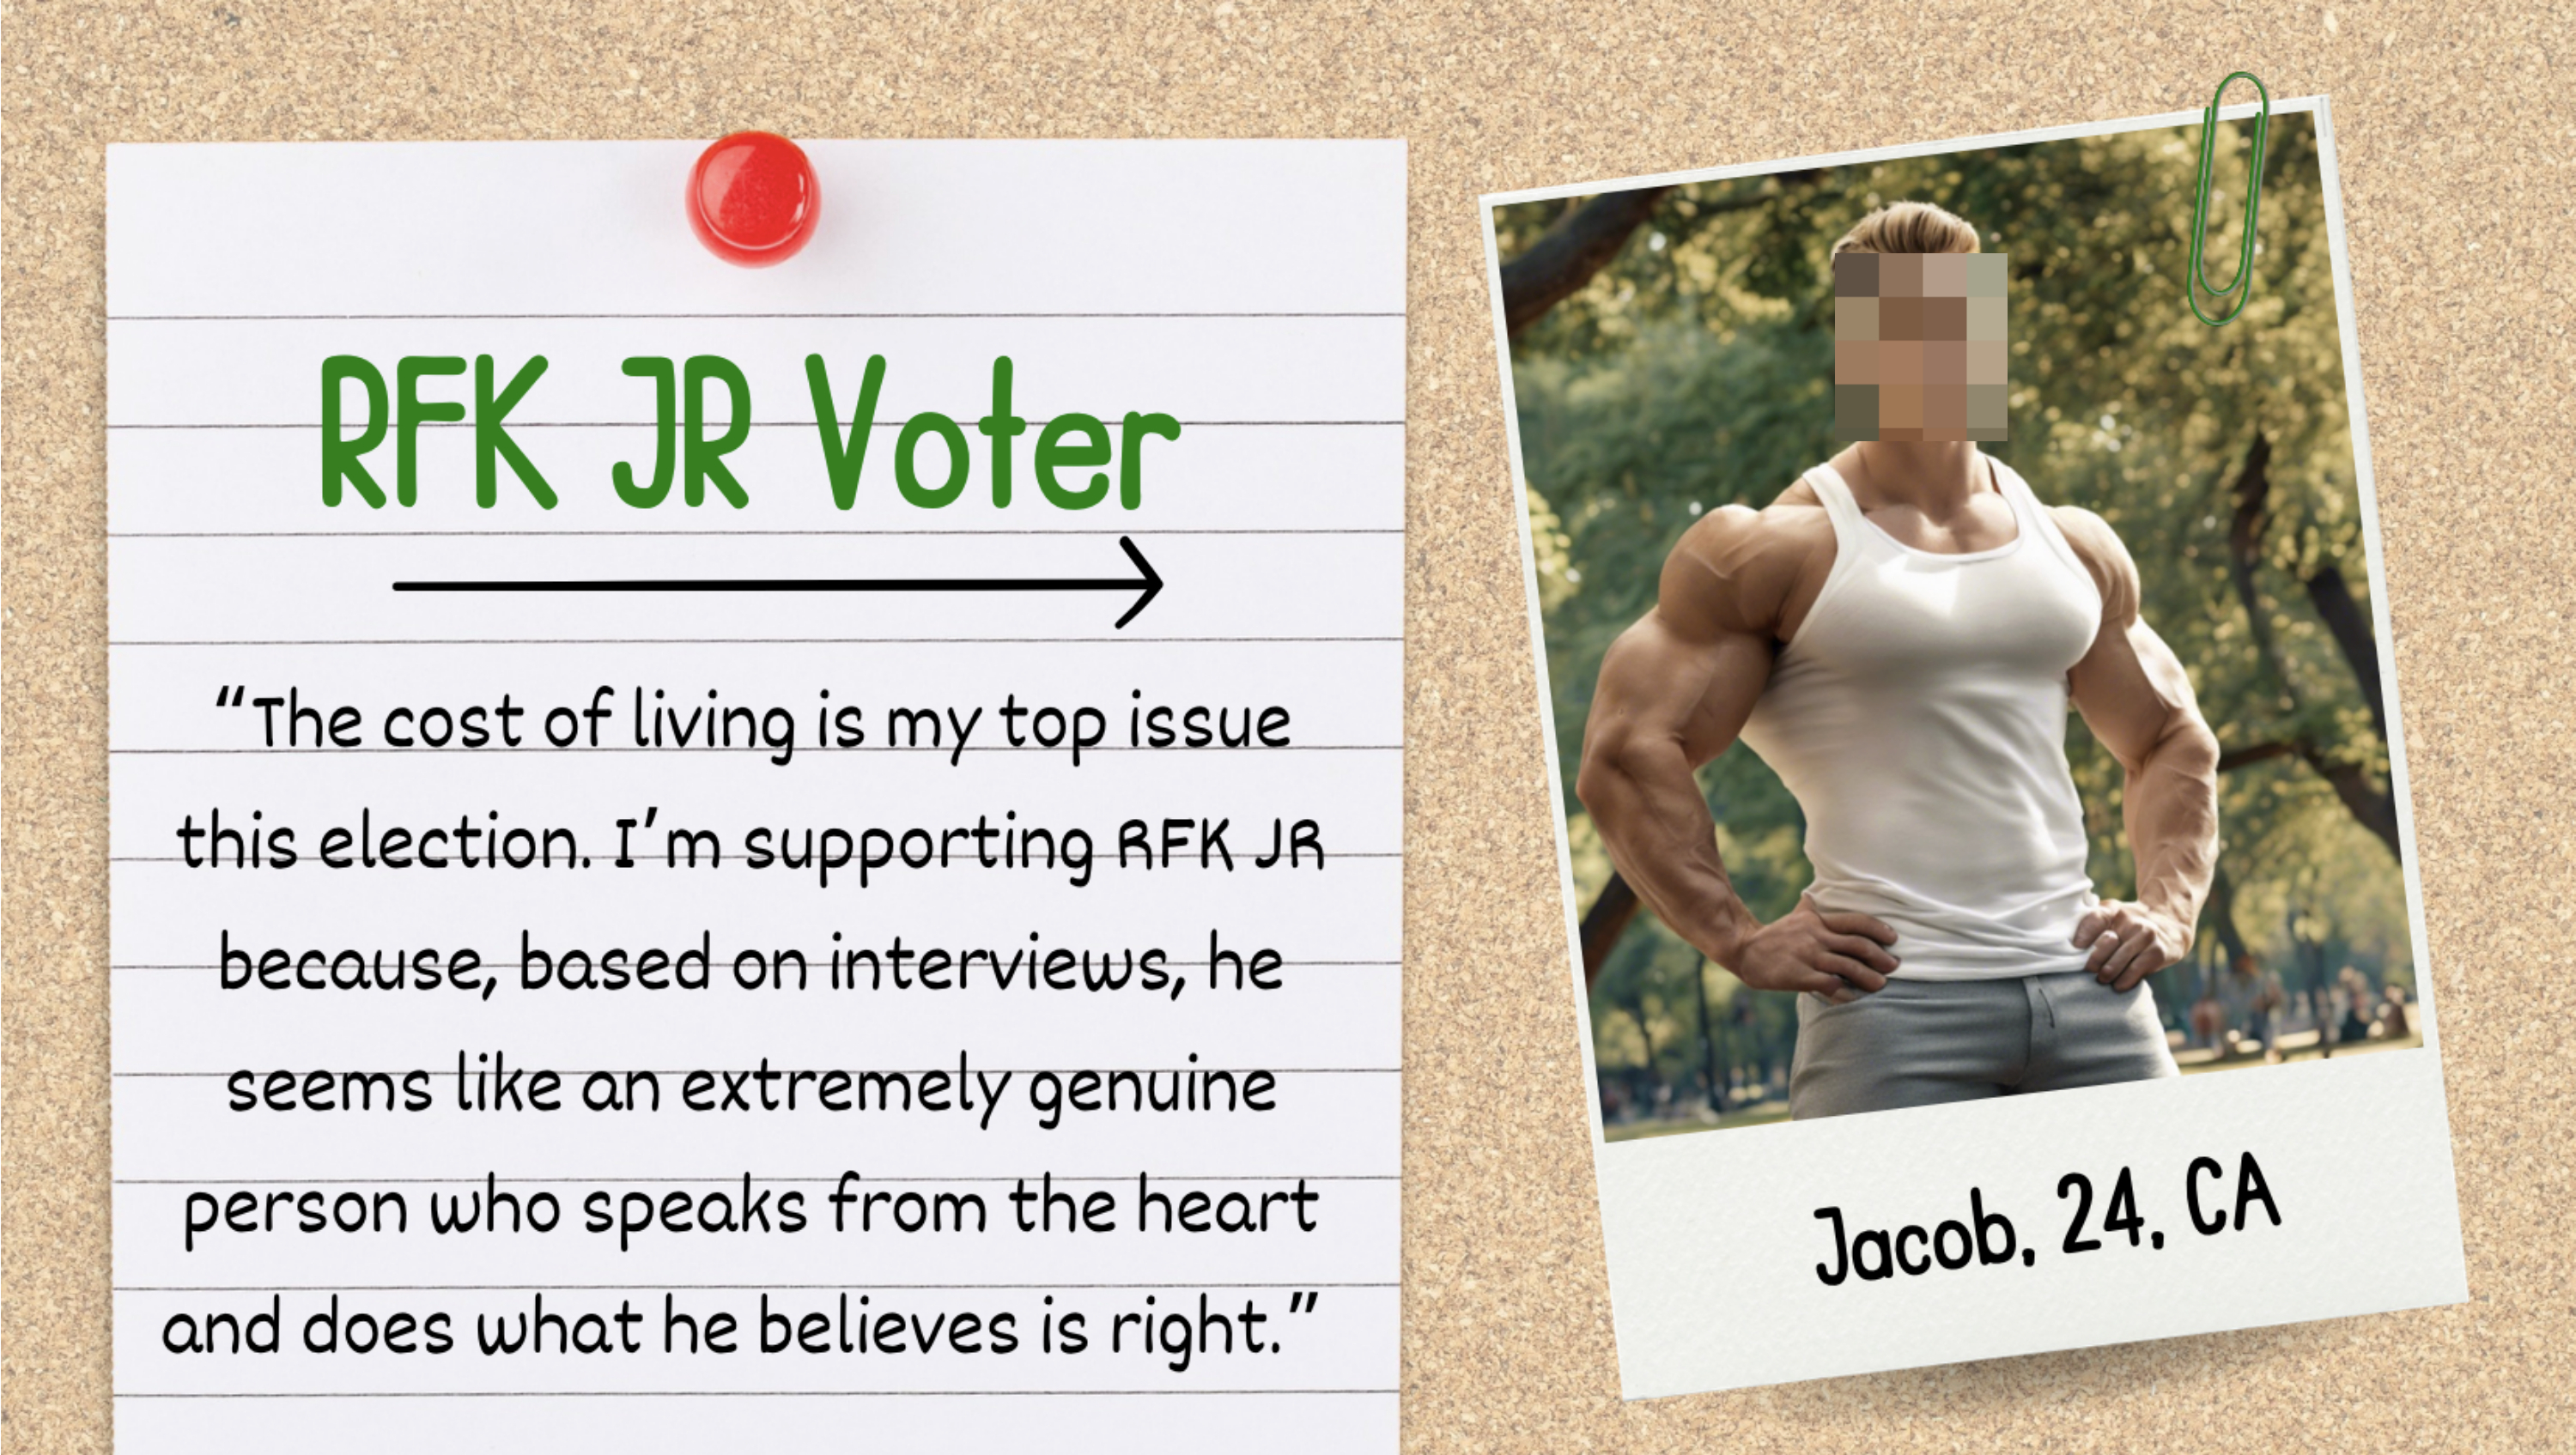 RFK JR Voter: Note on a pin board with text from Jacob, 24, CA. Next to it is a photo of a muscular man in a white tank top standing outdoors